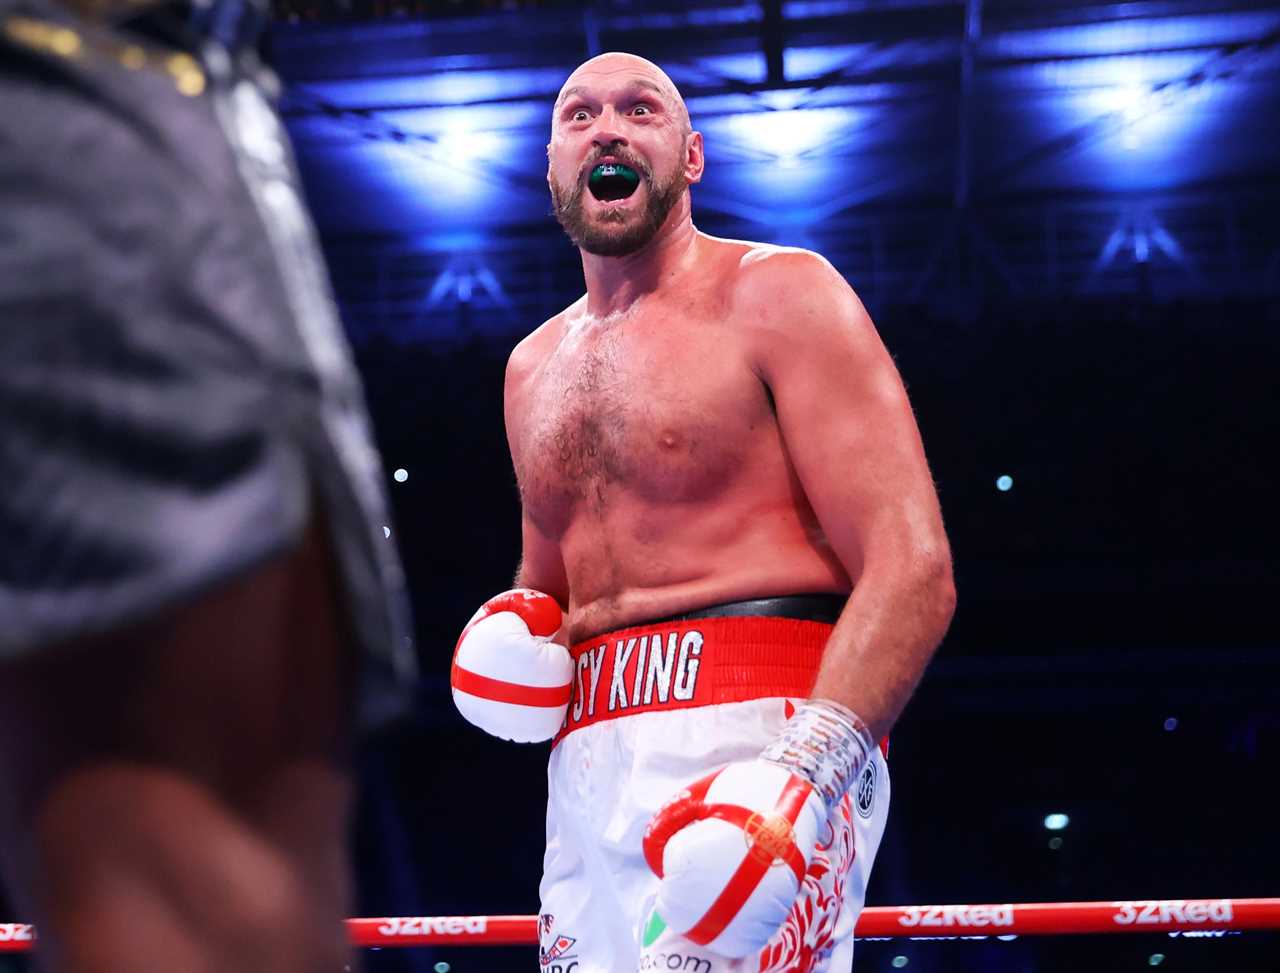 Tyson Fury shouts: Heavyweights, I own these motherf***ers - Tyson Fury sends a message to Joshua, Usyk, and Wilder about boxing rivals.